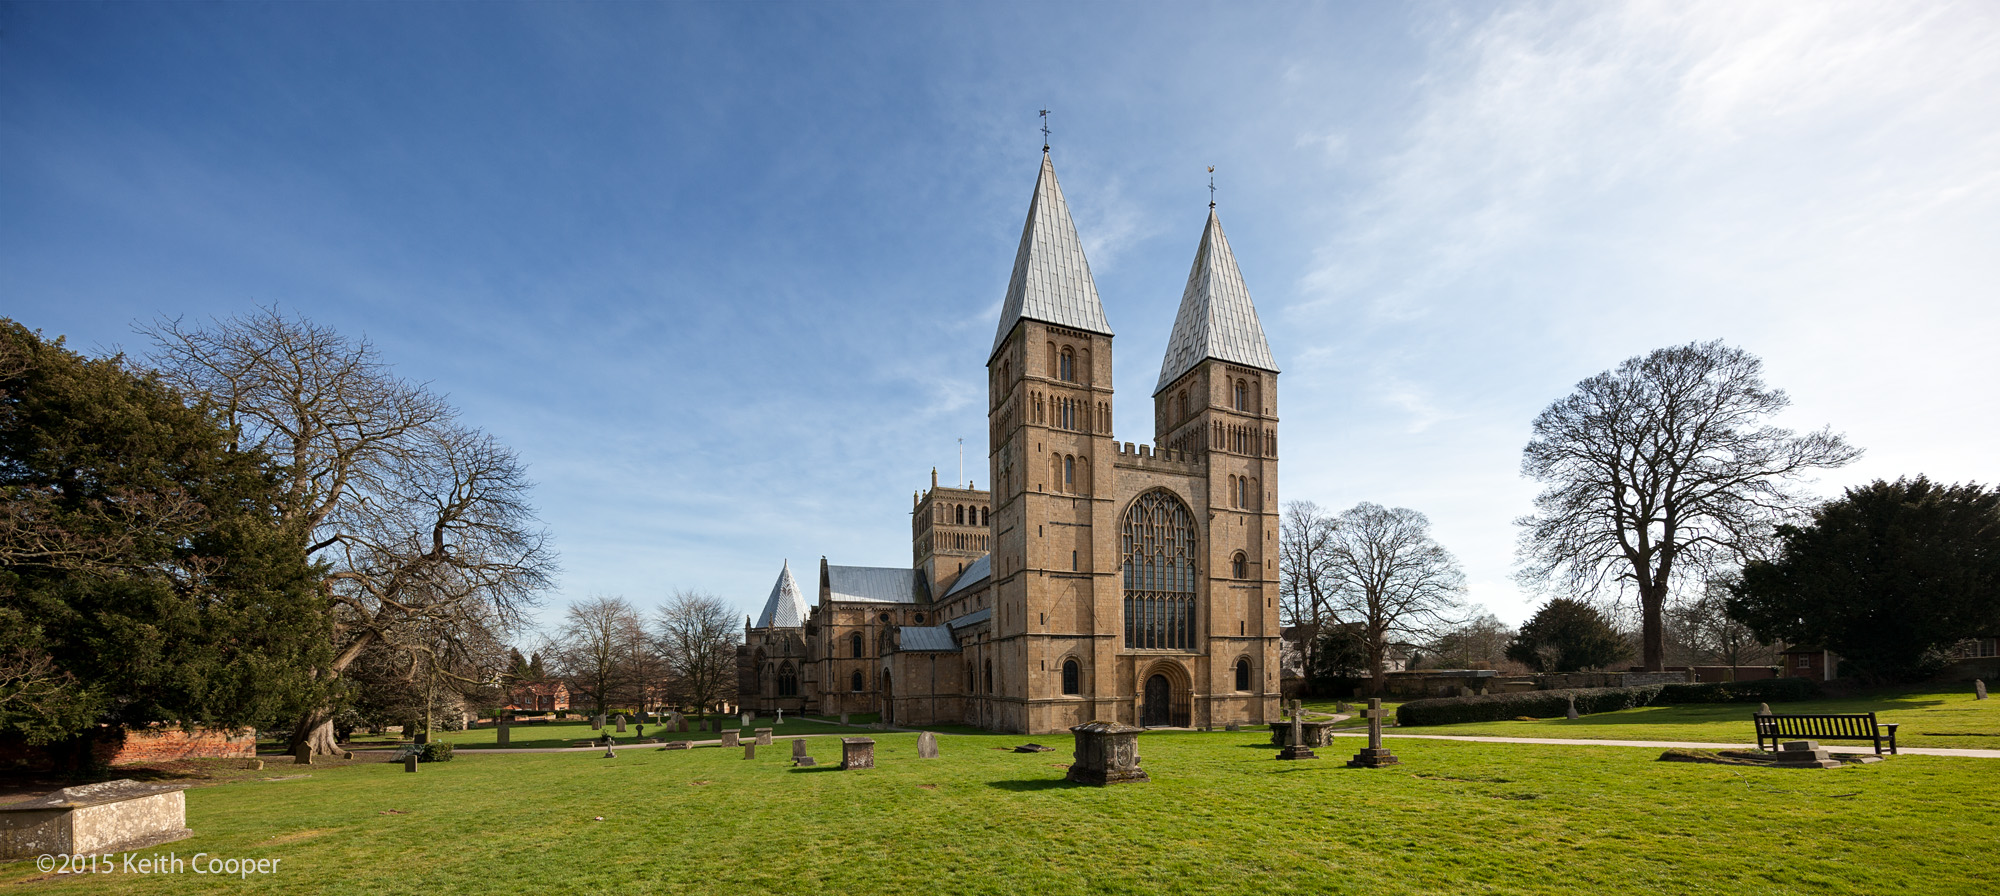 Southwell Minster and grounds